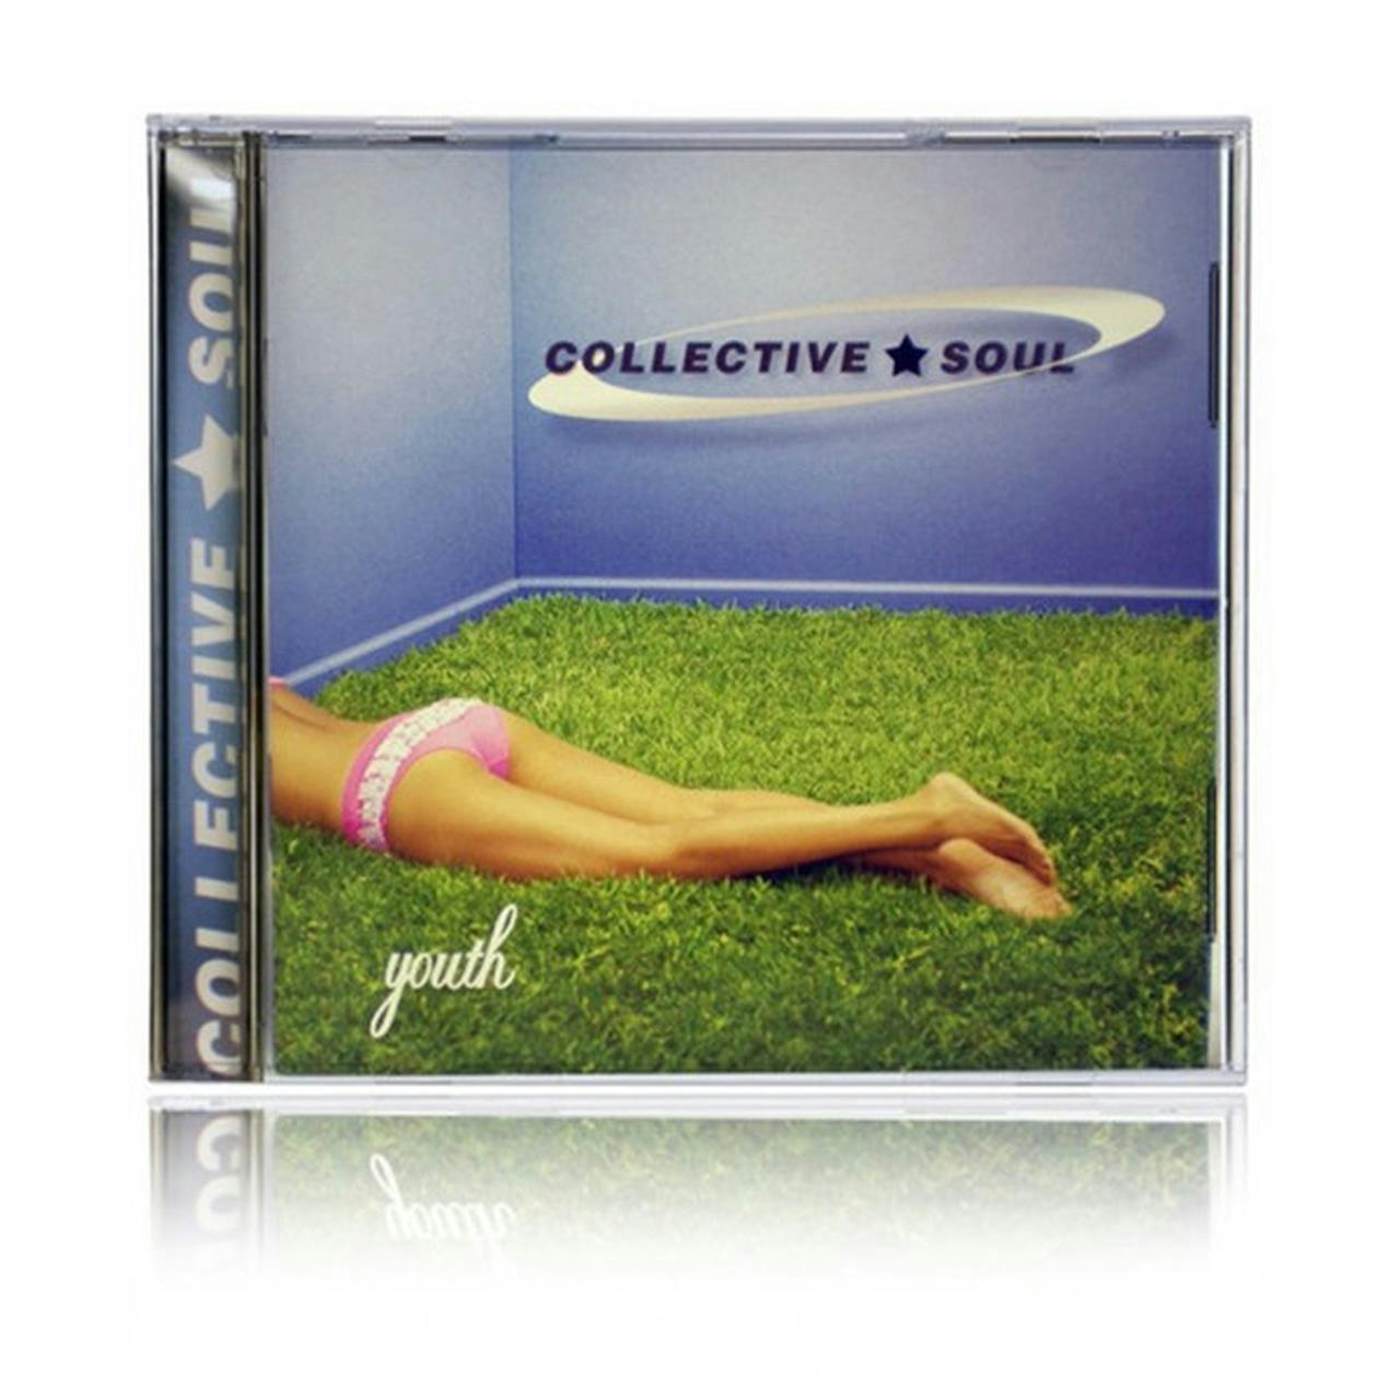 Collective Soul "Youth" CD